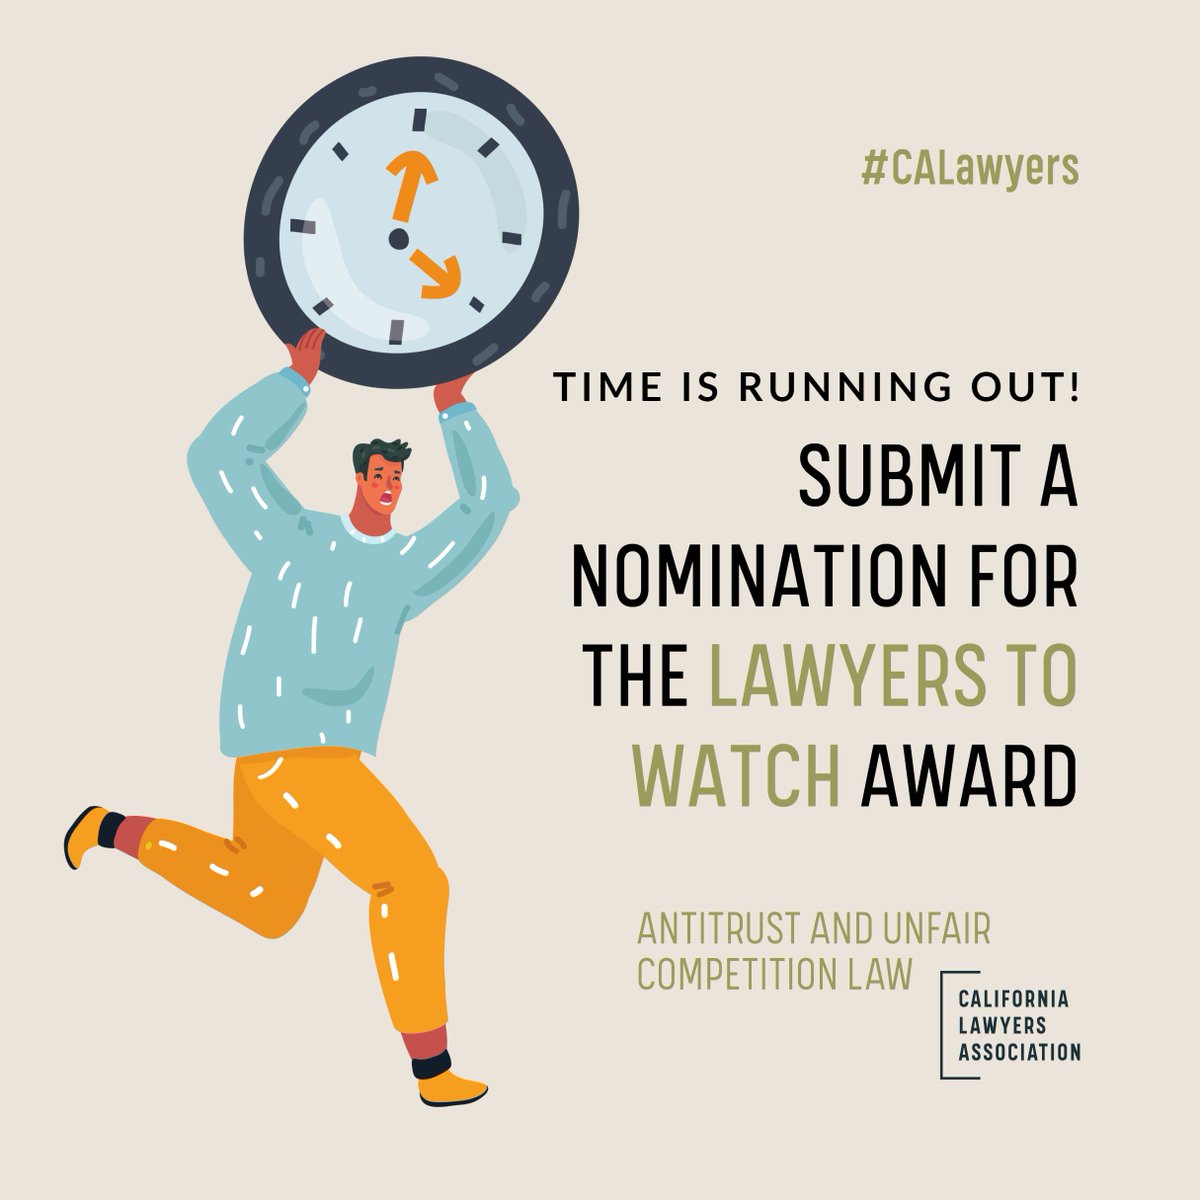 Time is running out to submit your nominations for the Antitrust and Unfair Competition Lawyers to Watch award! ⌛

➡️ Learn more and submit your nominations here: calawyers.org/section/antitr…

#Antitrust #AntitrustLawyers #CALawyers #CLAawards #Nominations #awards #TogetherWeLaw